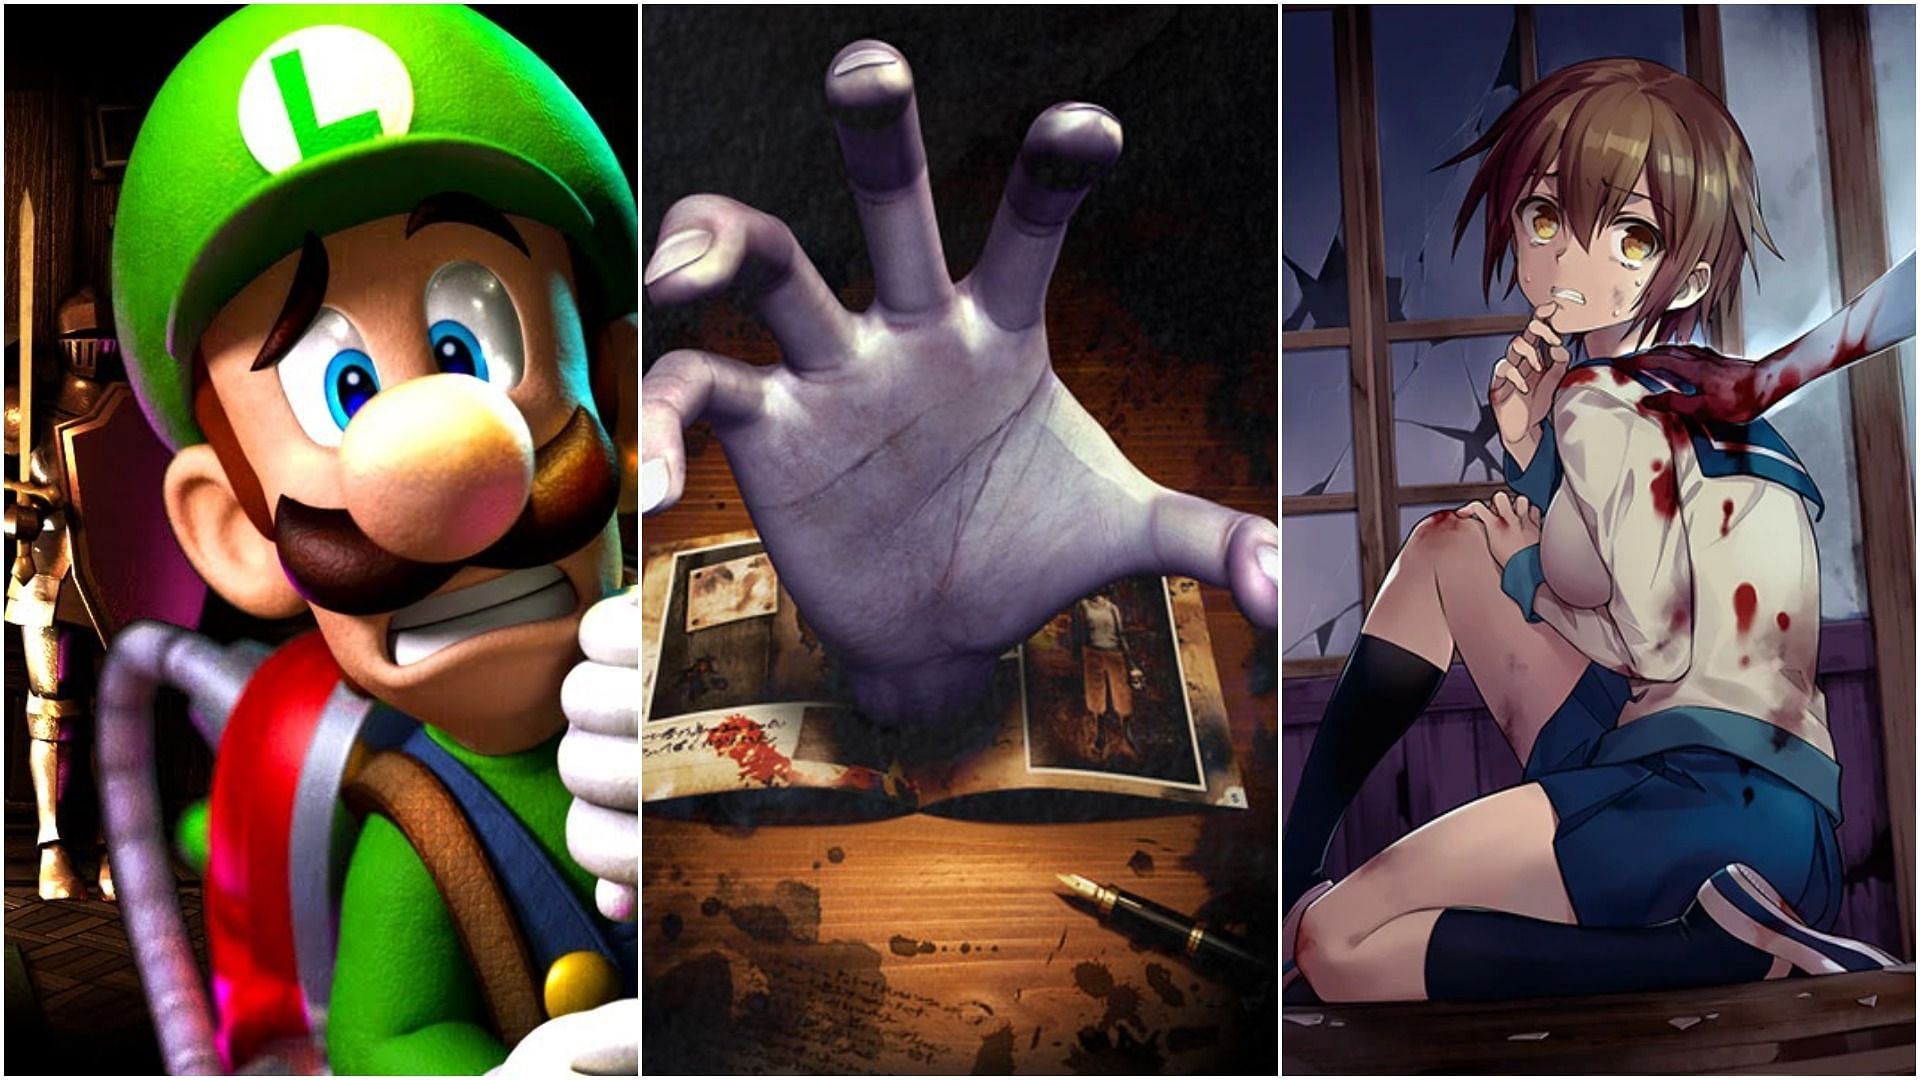 The New Nintendo 3DS, plus scary games to get you ready for Halloween